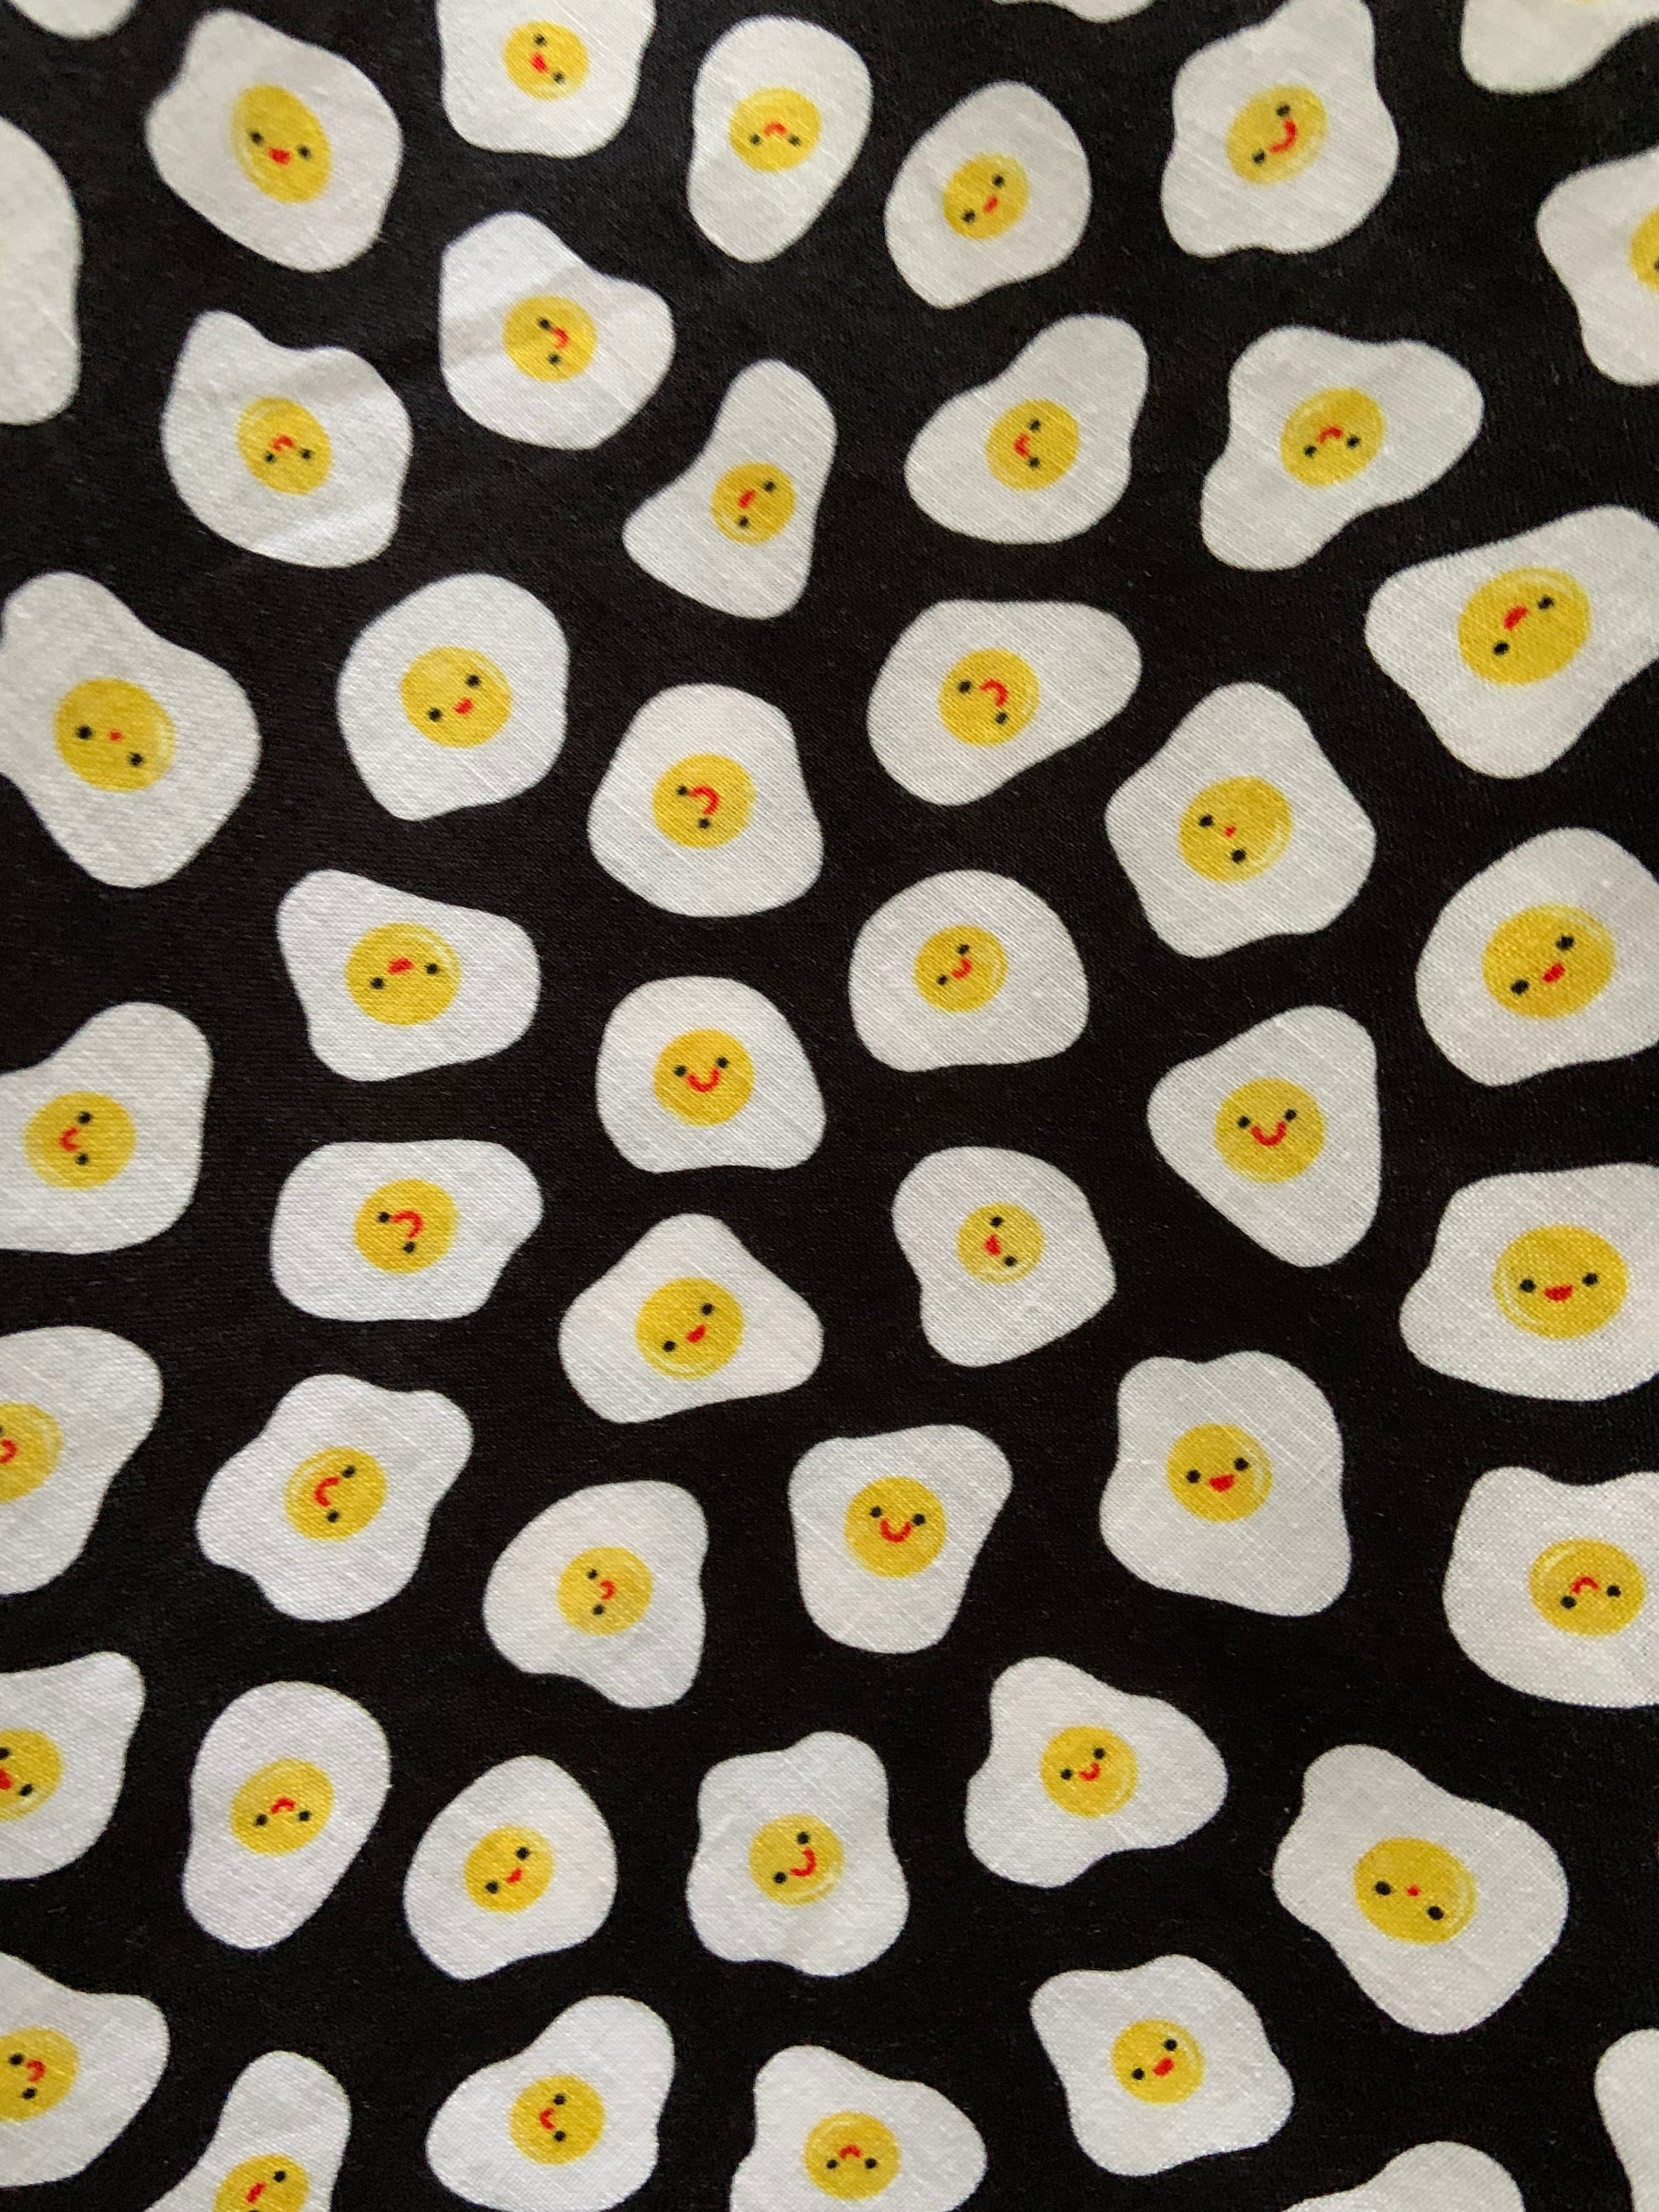 a close up of the fabric showing the smiley faces on the eggs